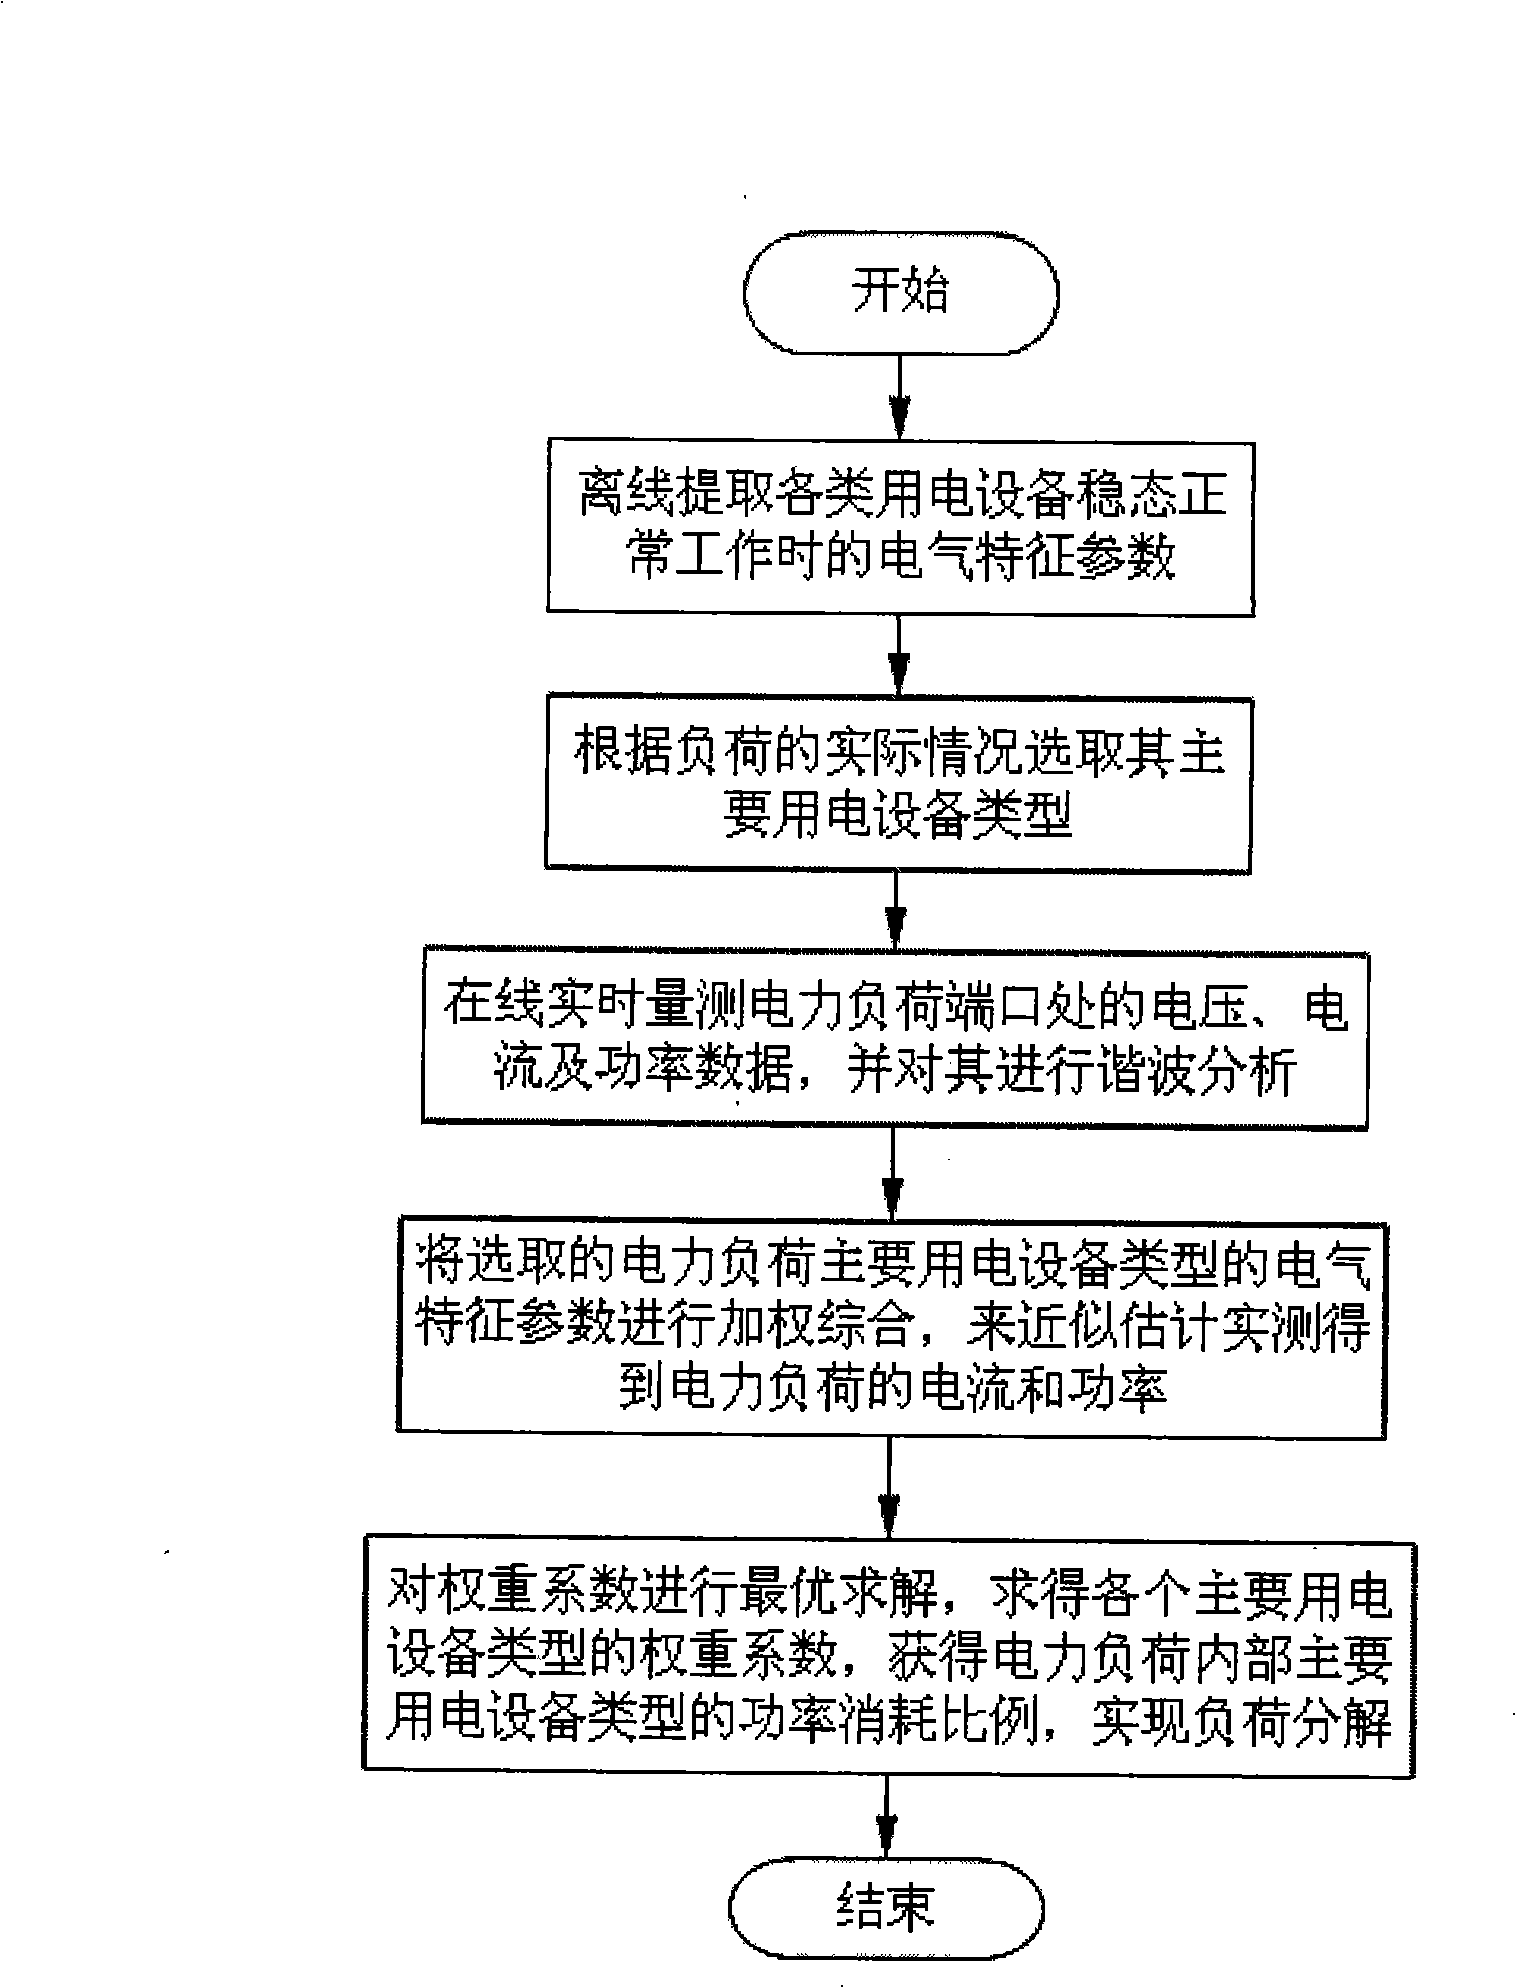 Method for real time sorting non-intrusion type electric load